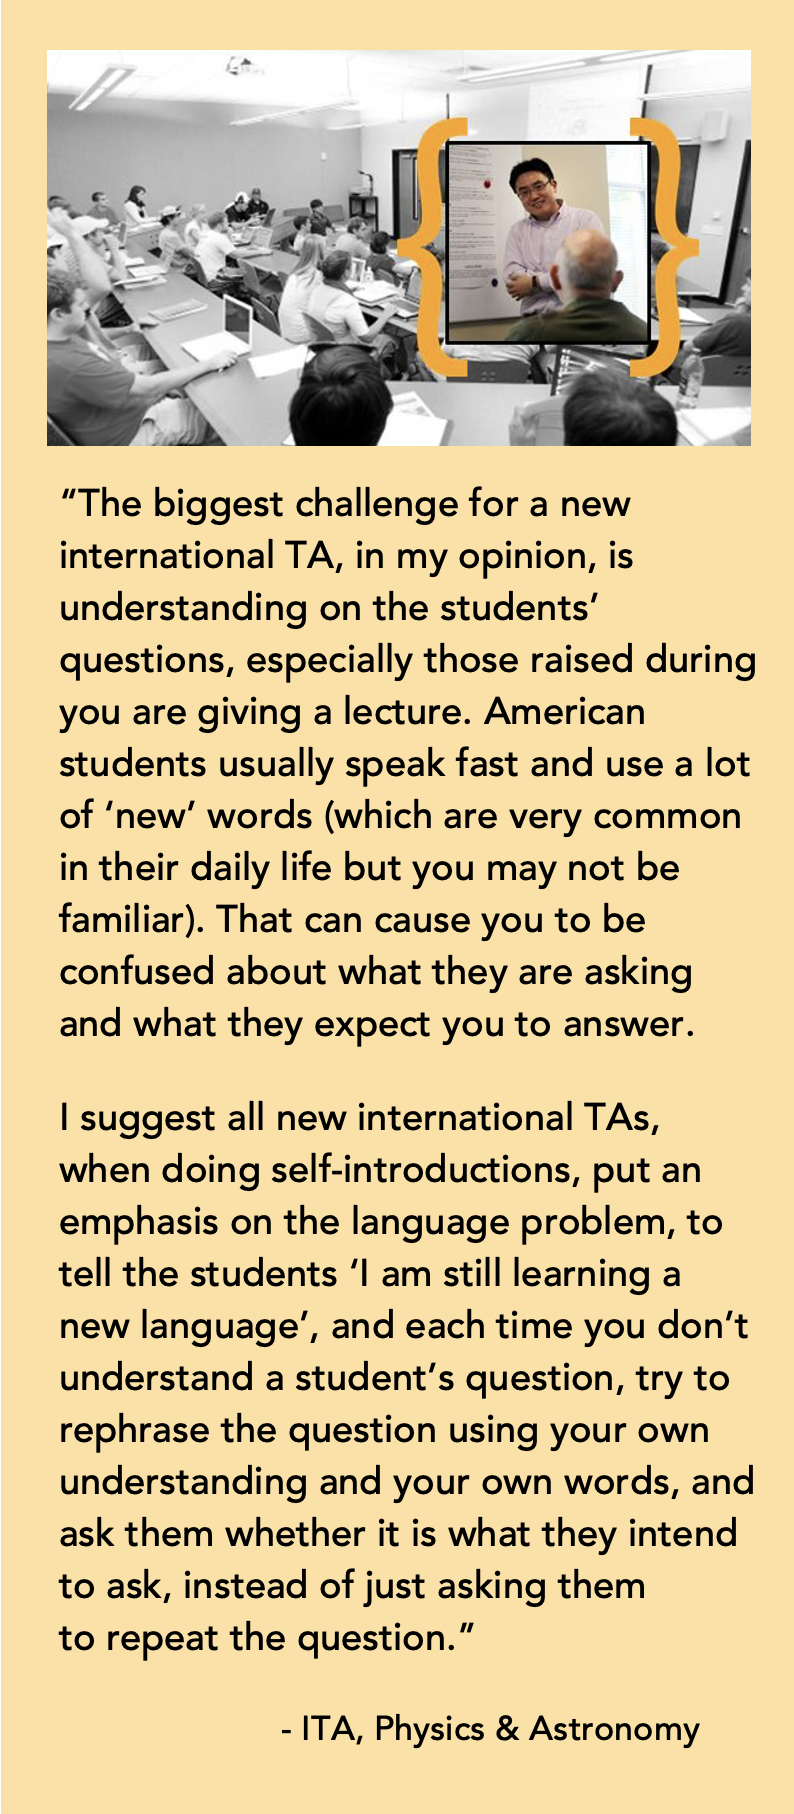 quote about language challenges by and International TA in Physics and Astronomy